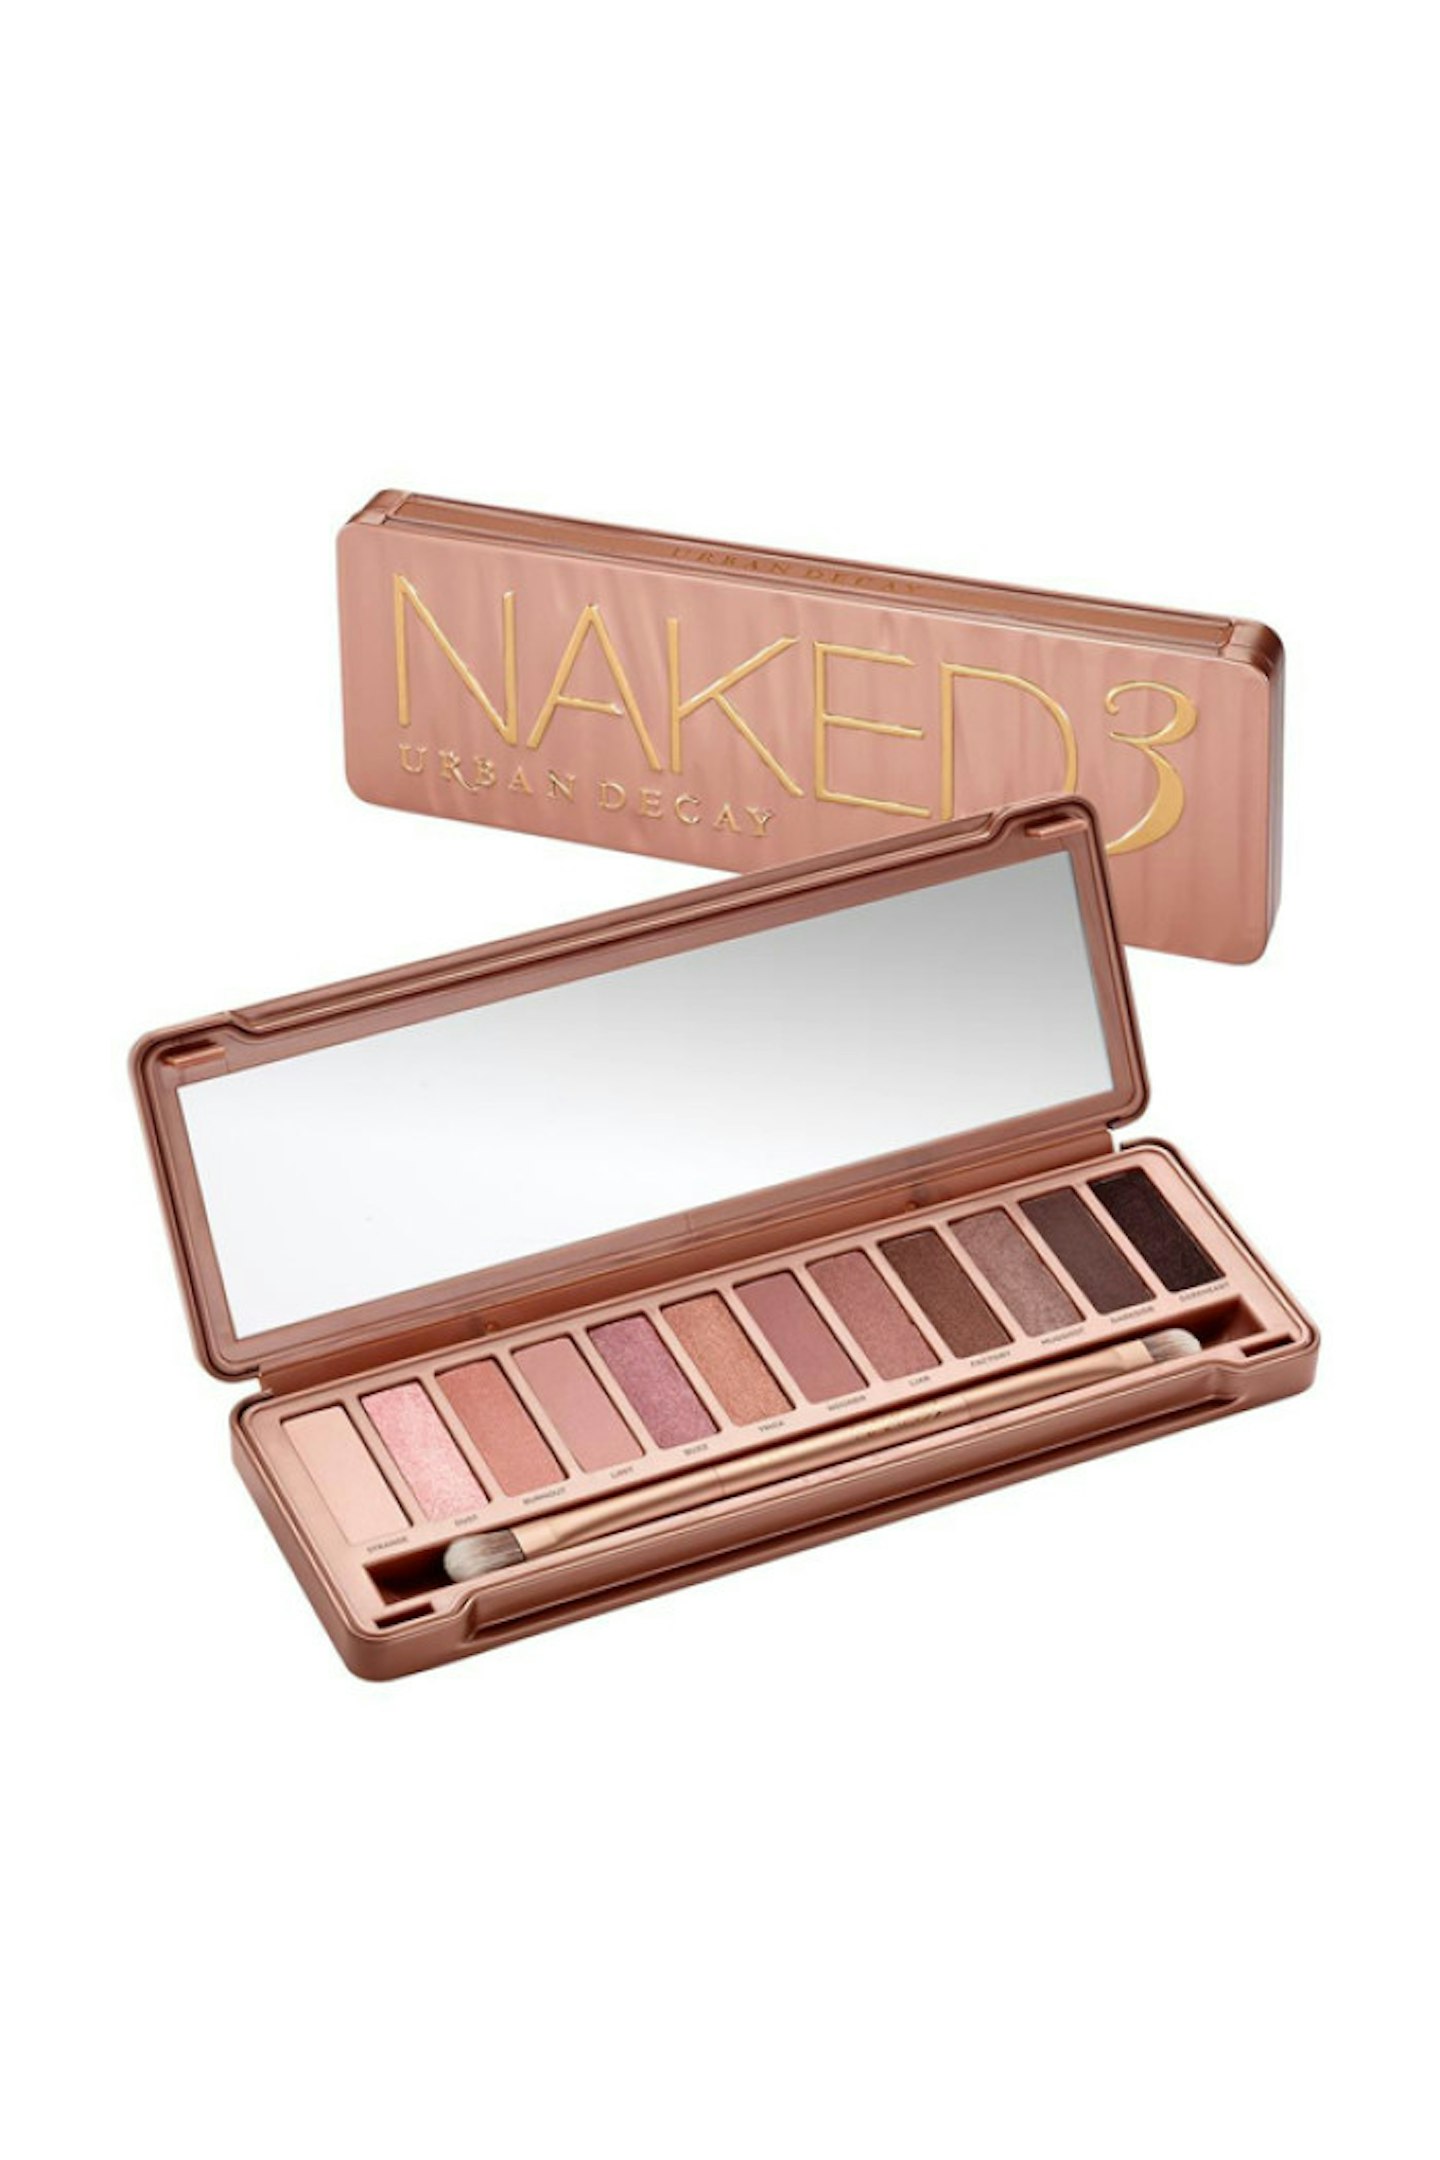 Urban Decay Naked 3 Palette, £38.00